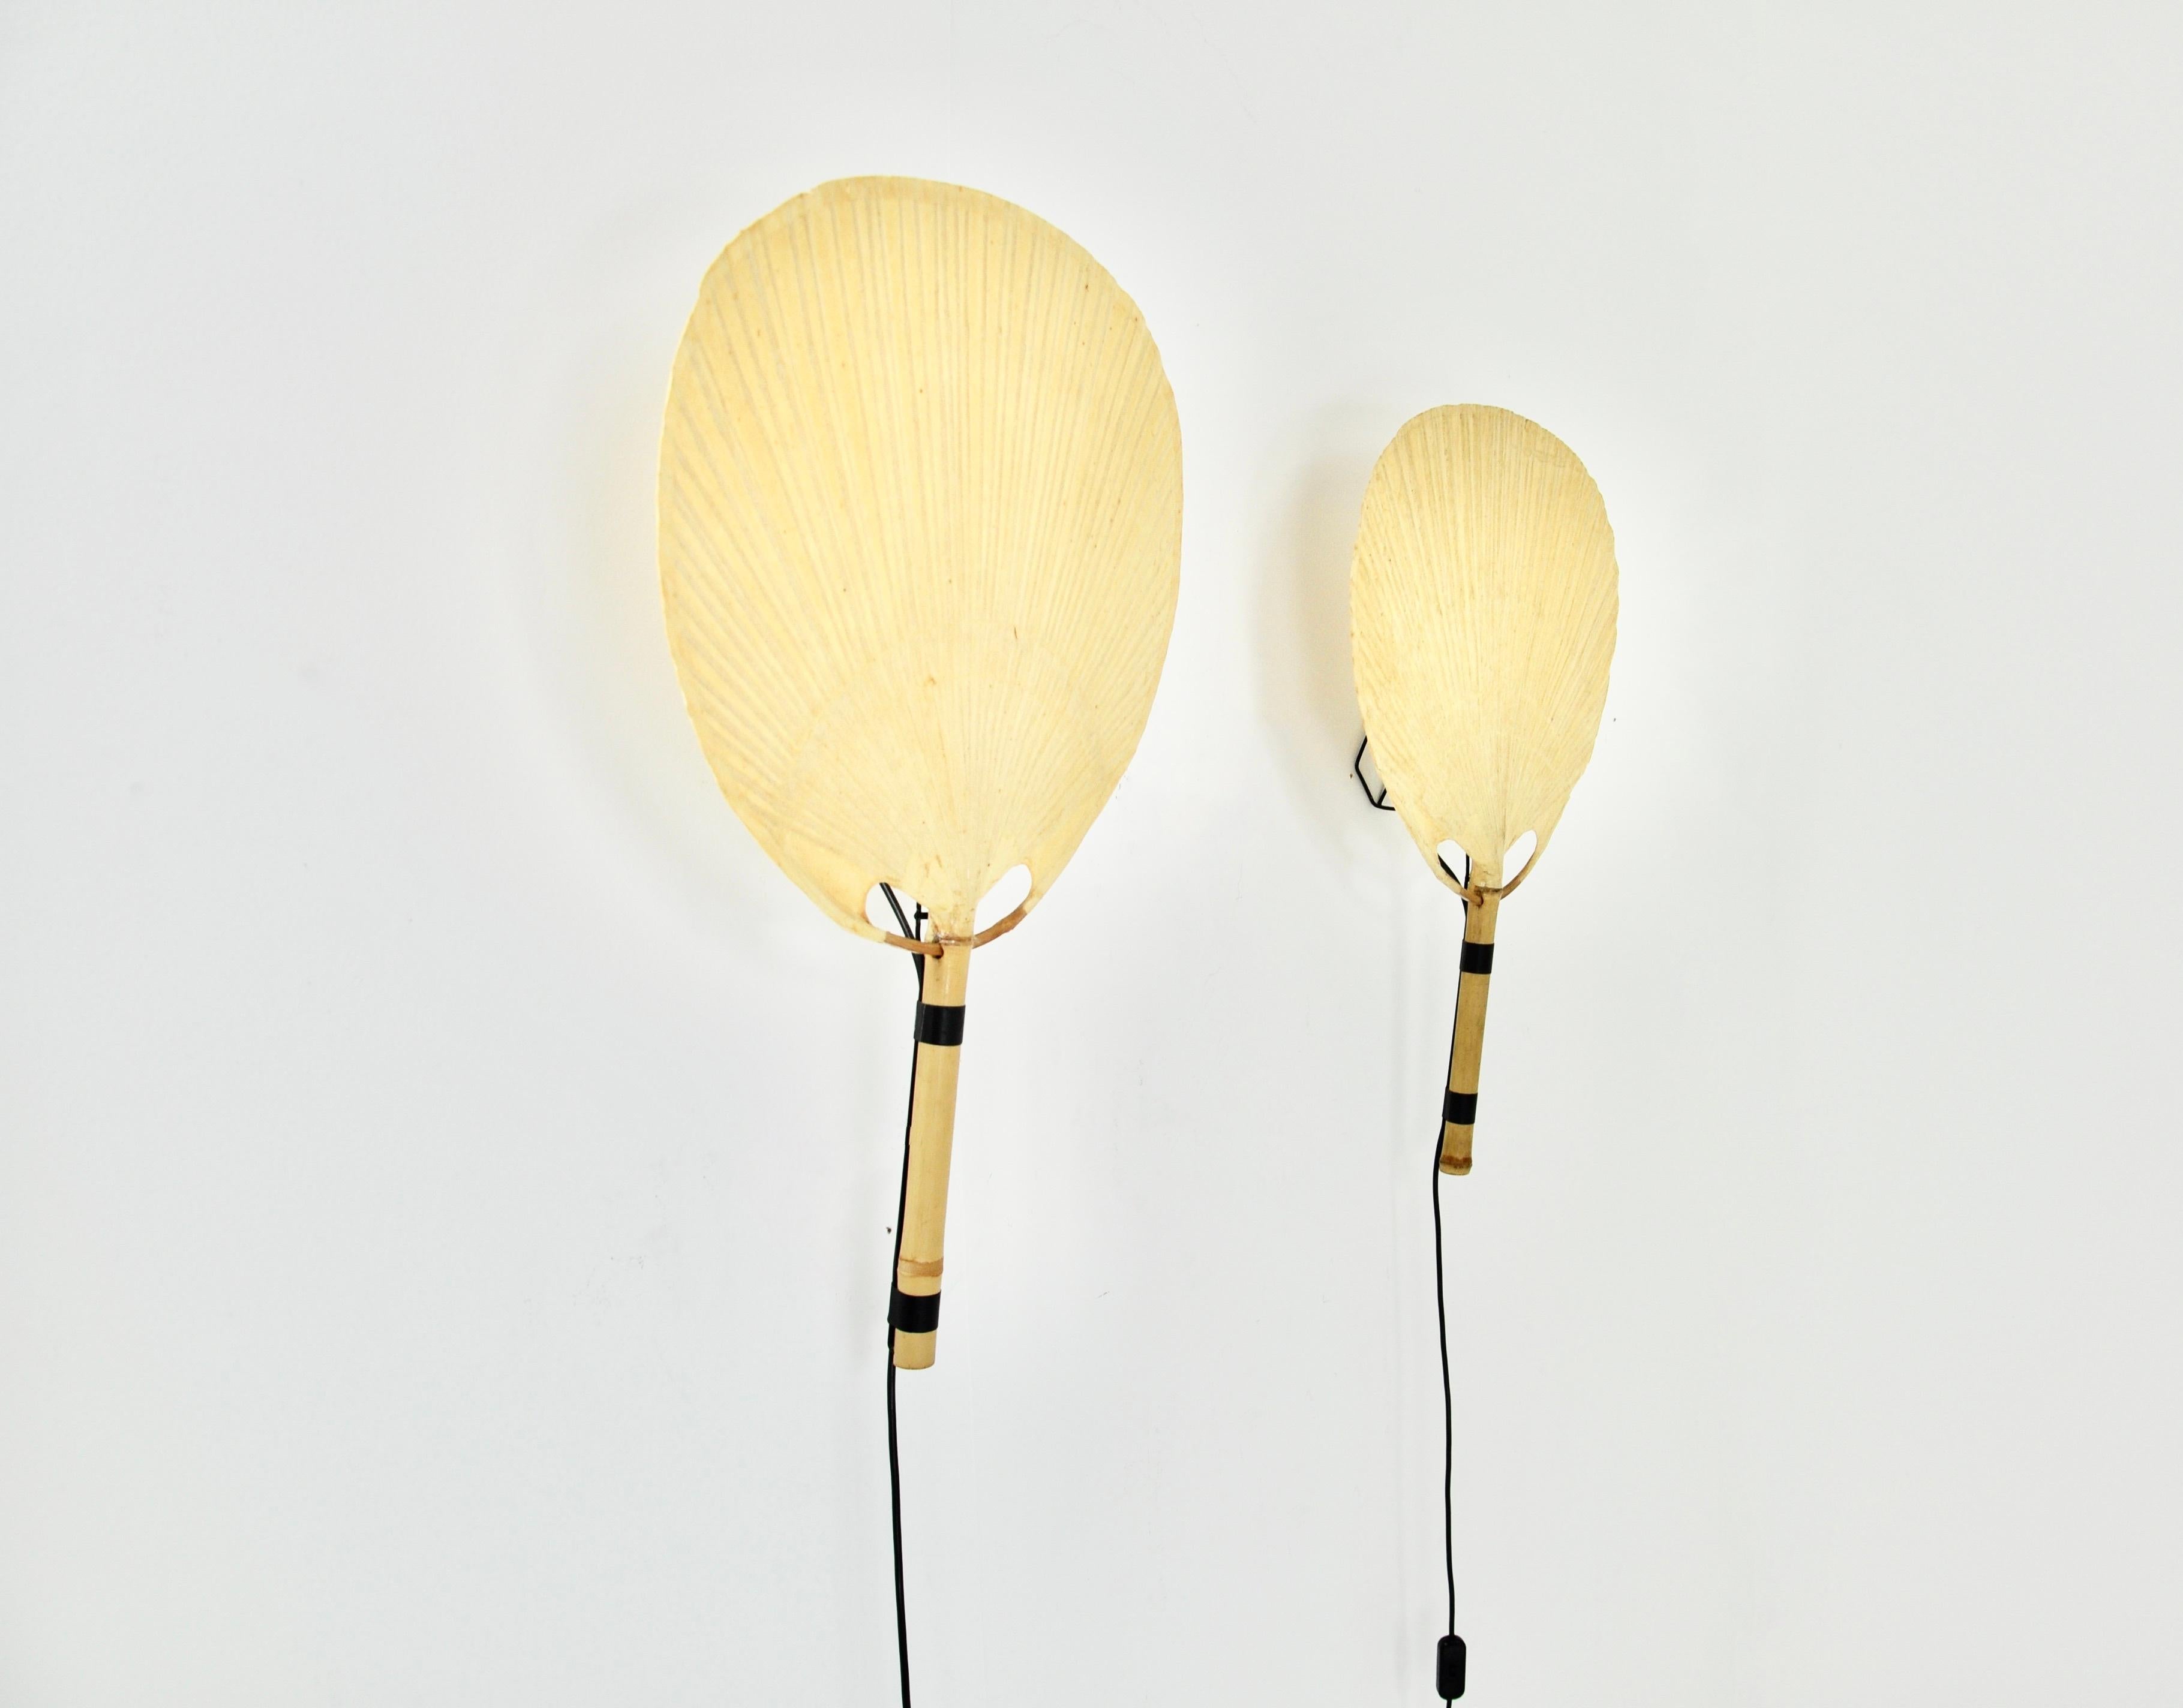 German Pair of Uchiwa Wall Lamps by Ingo Maurer for M Design, 1970s